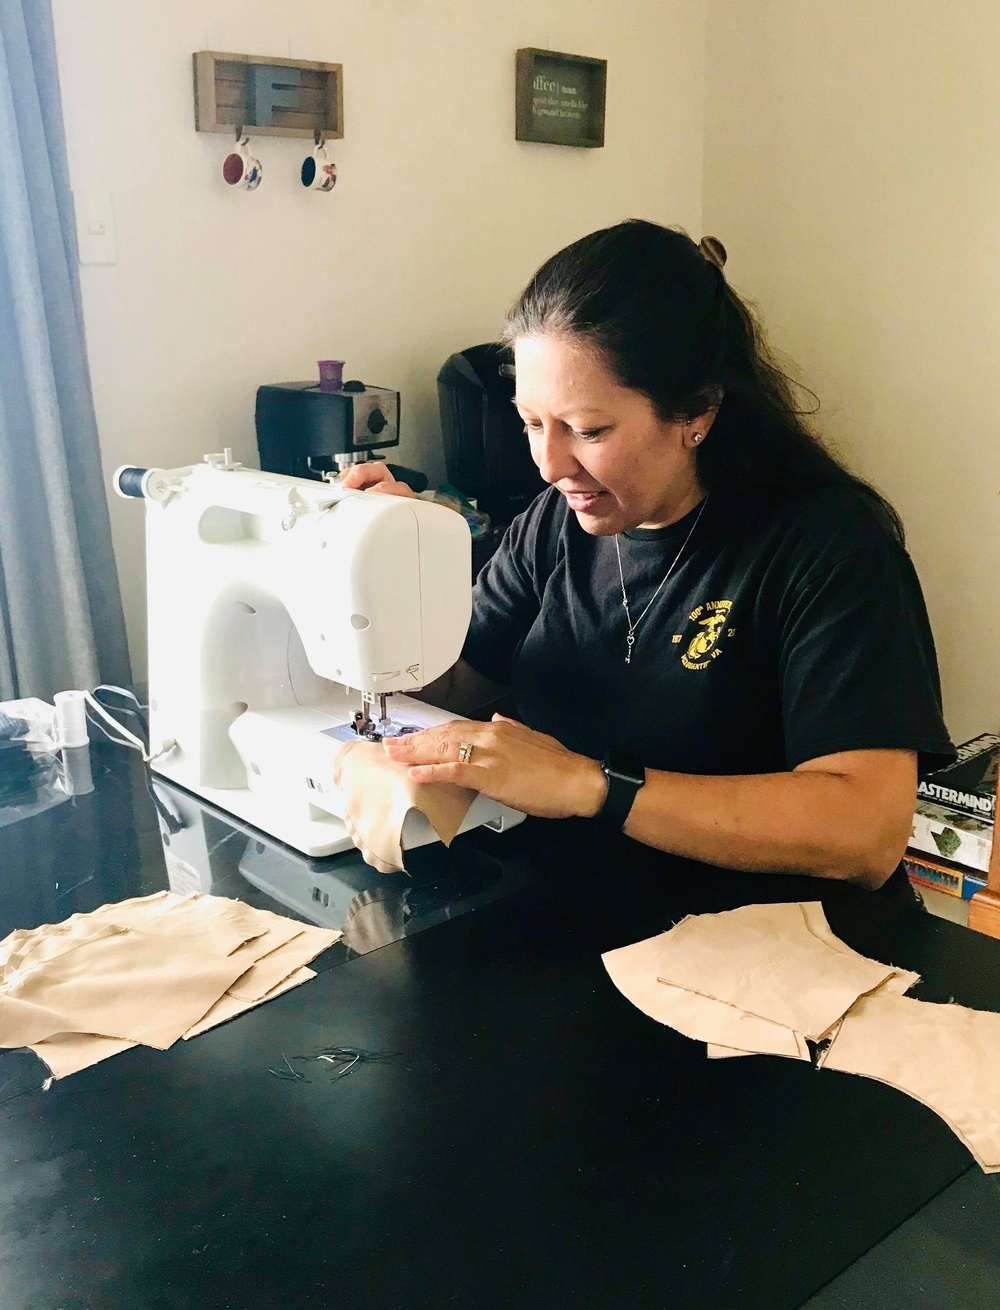 The Home Front: Families sew masks for 31st MEU Marines